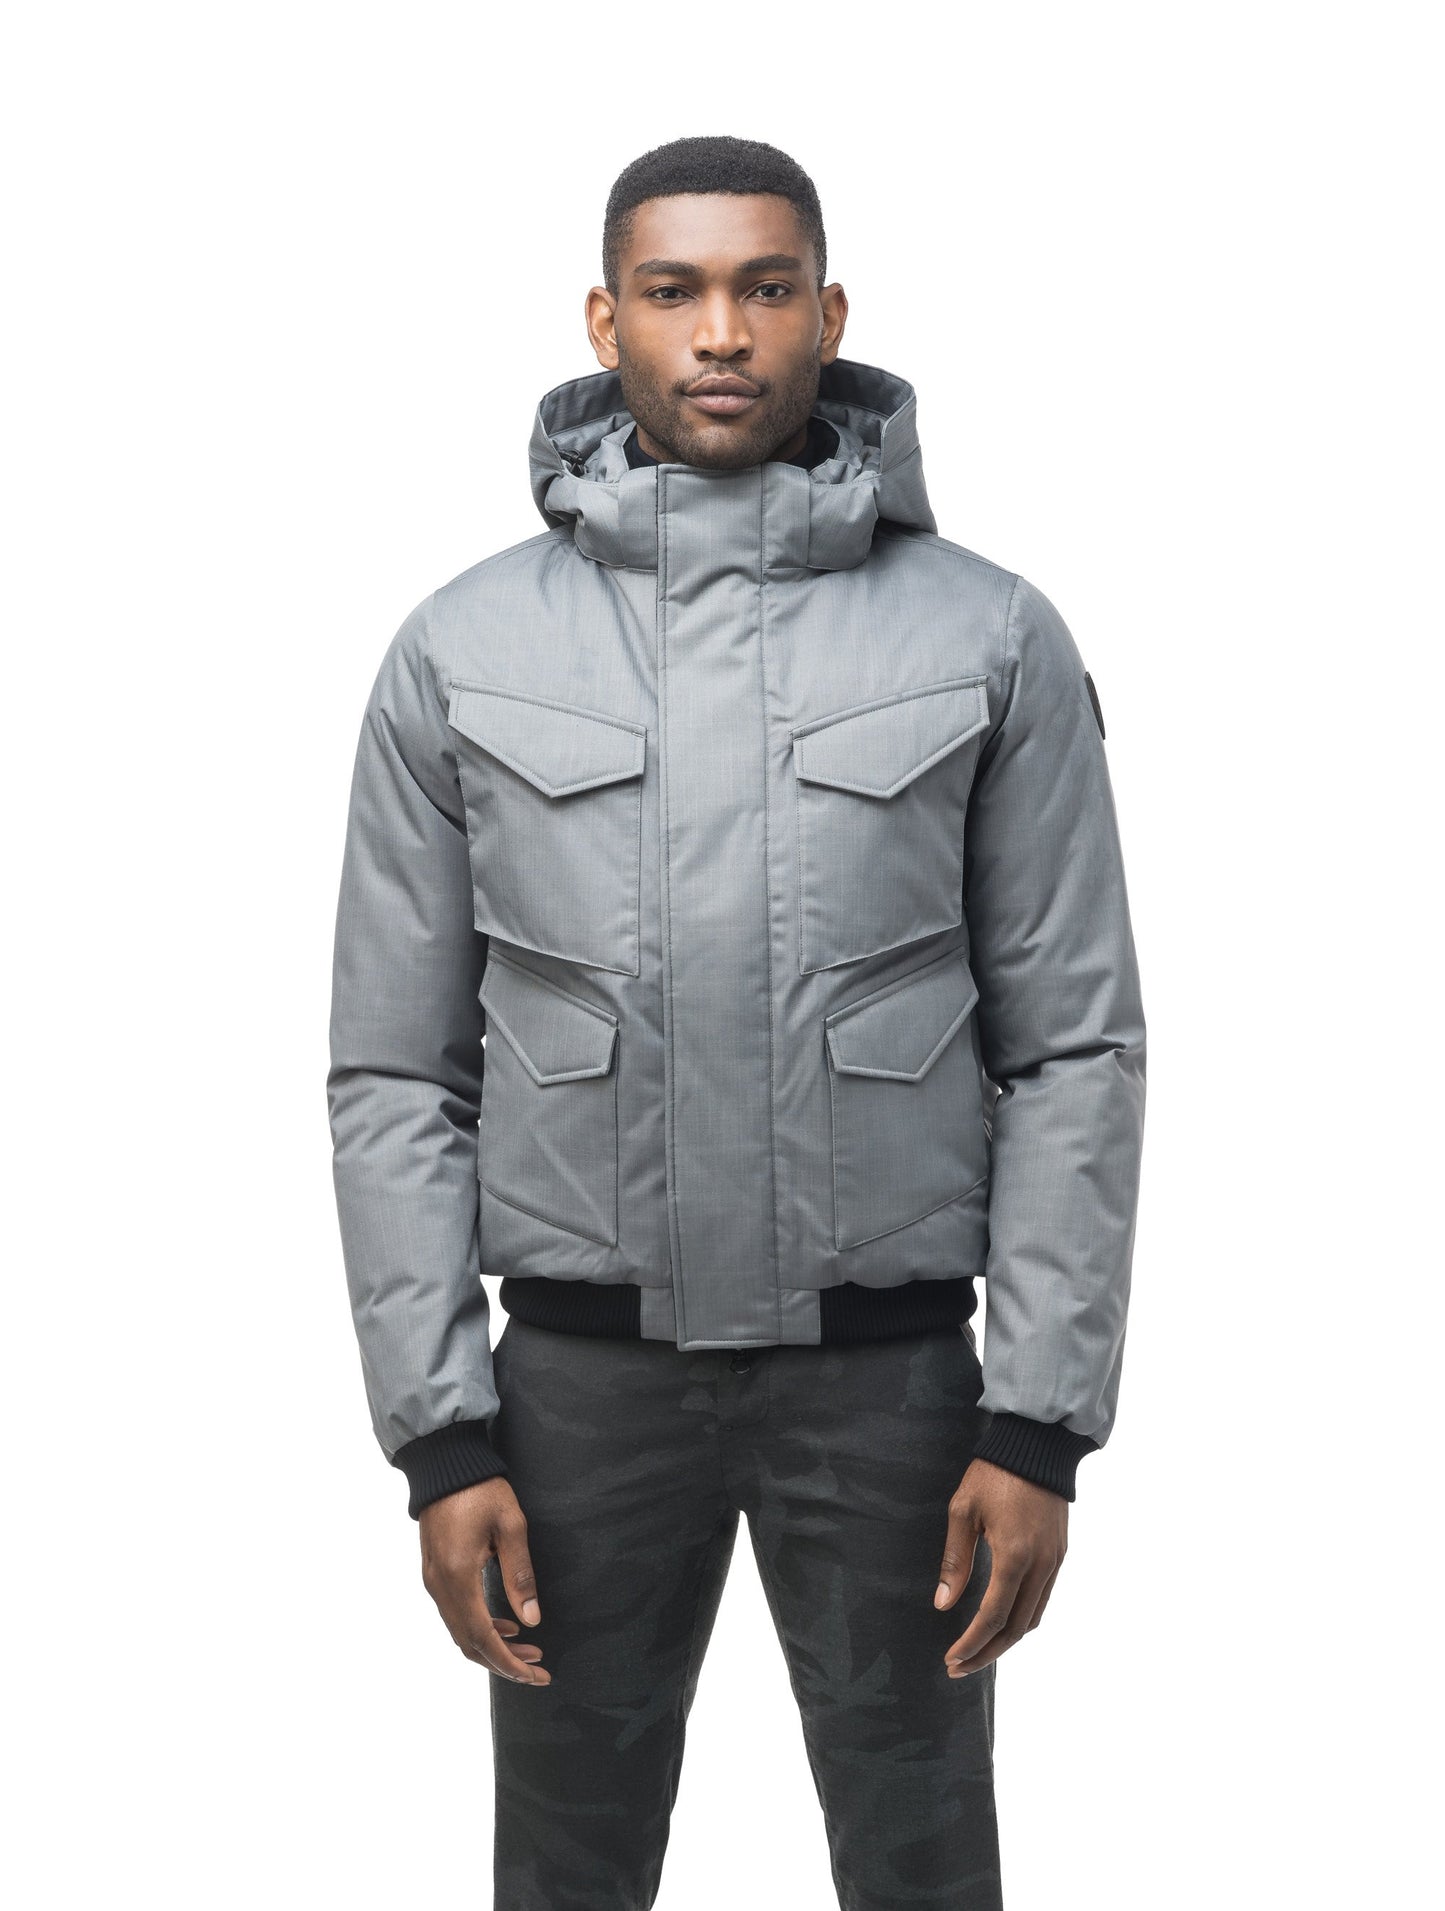 Men's waist length bomber with four huge pockets on the front in Concrete